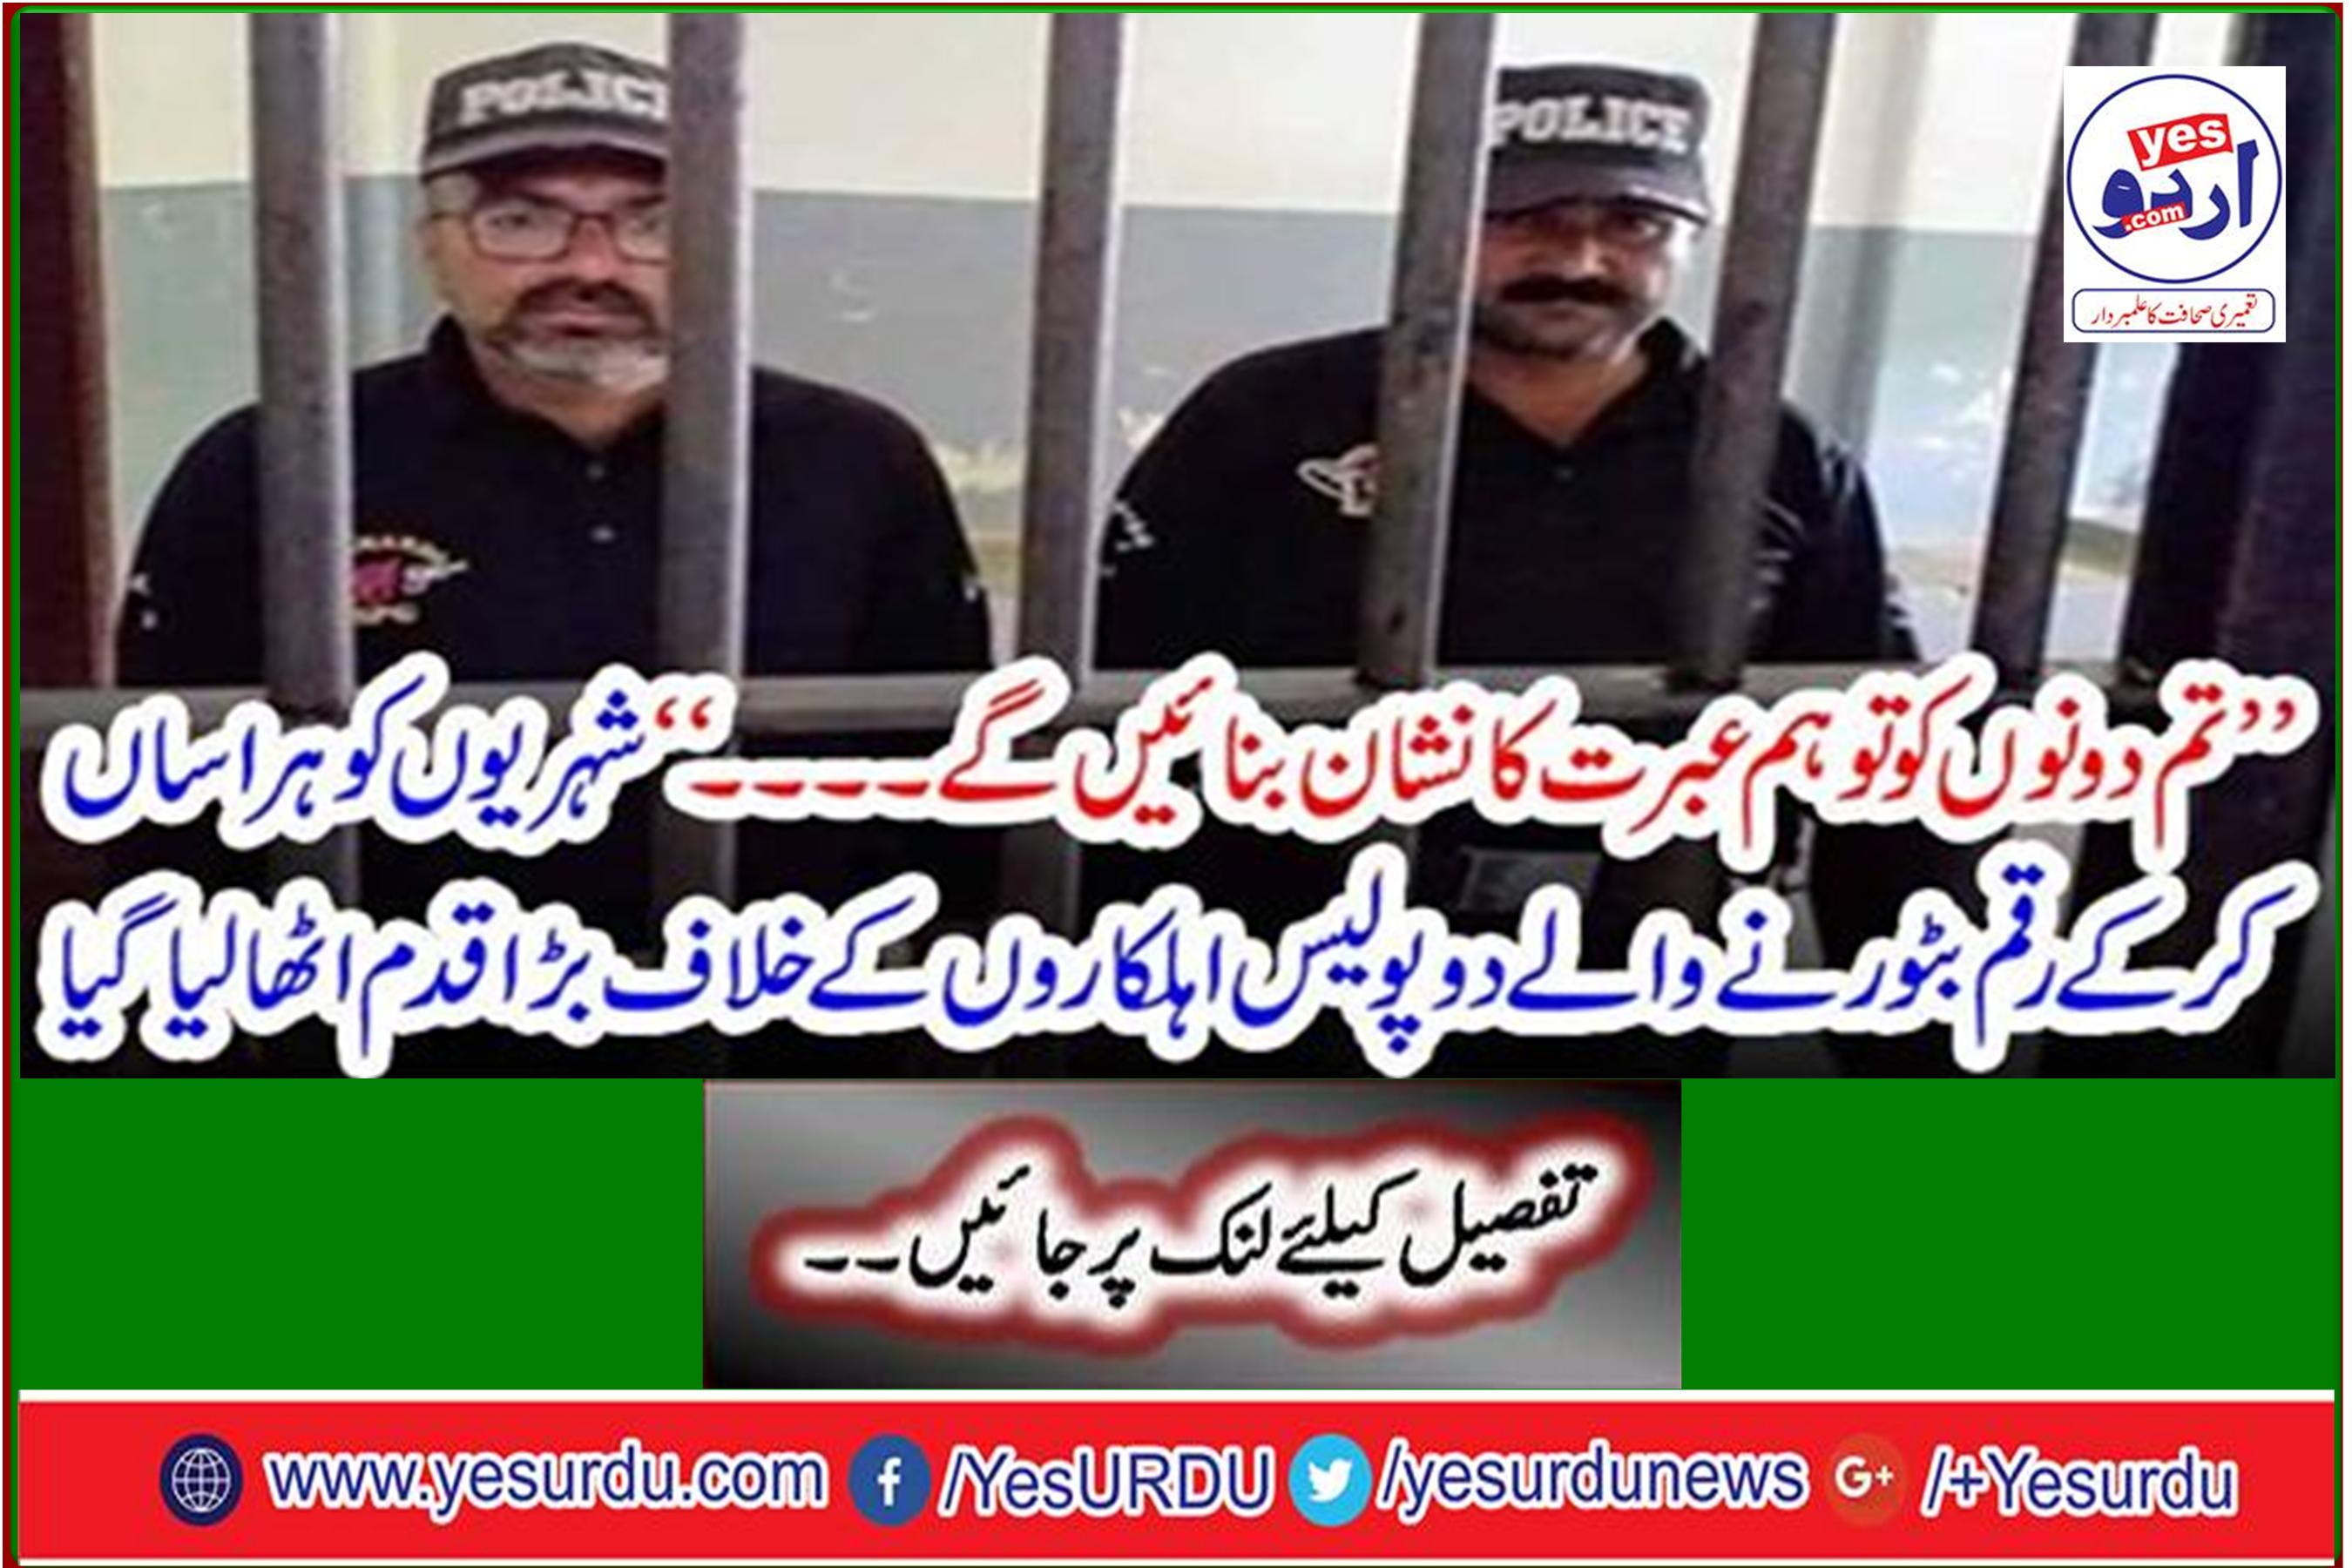 'Big step was taken against two policemen who harassed the citizens.